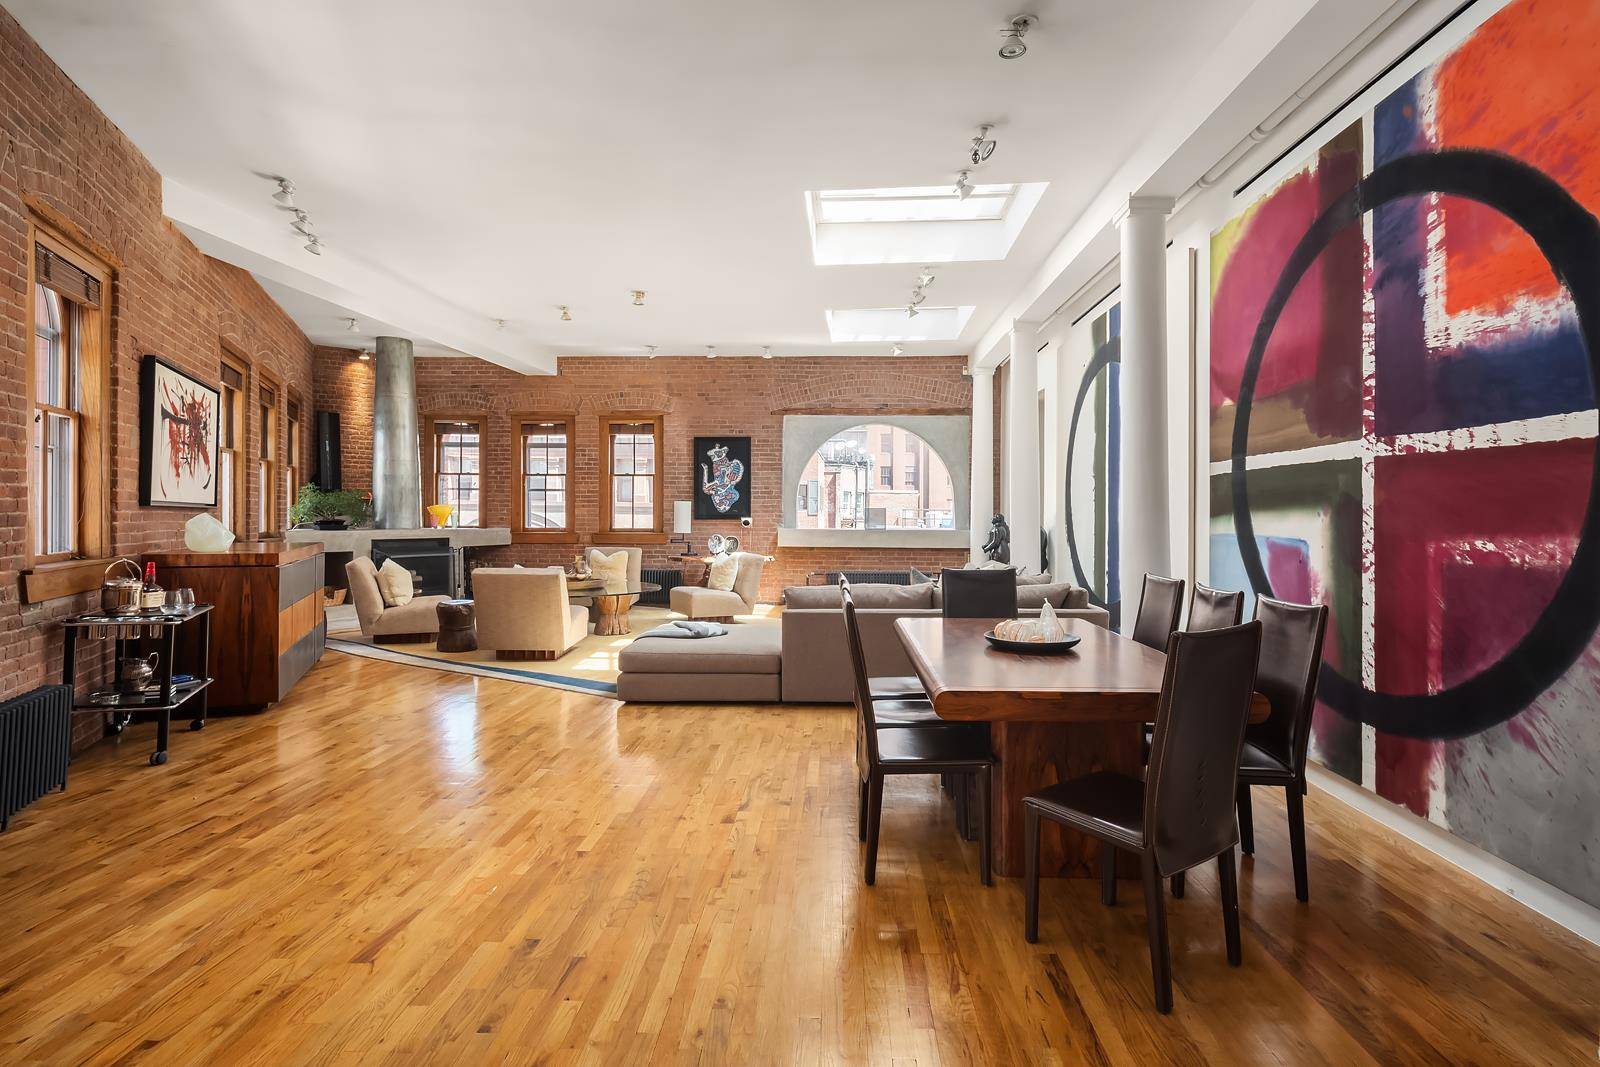 Penthouse D at 16 Hudson St is a uniquely special offering nestled in the heart of Tribeca and features approximately 3, 000 interior and 3000 exterior square footage of dramatic ...